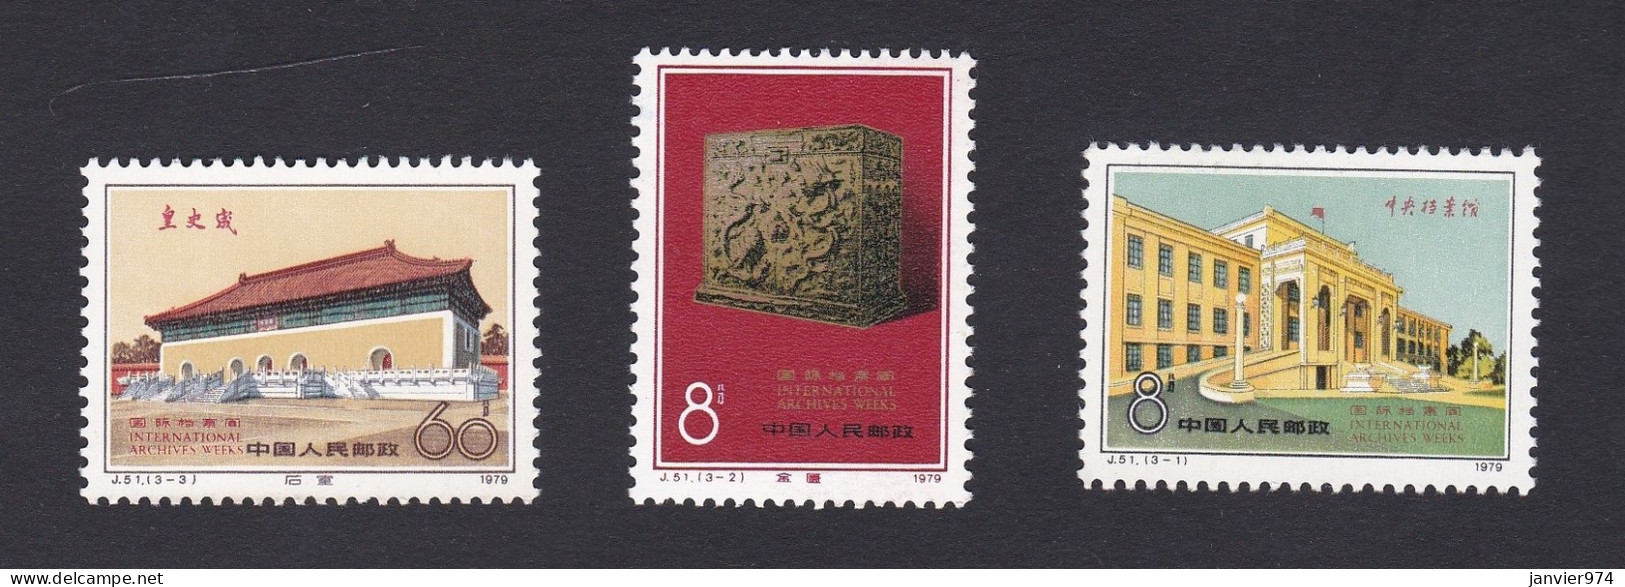 Chine 1979. Semaines Internationales Des Archives, La Serie Complète , 3 Timbres Neufs , Scan Recto Verso . - Neufs